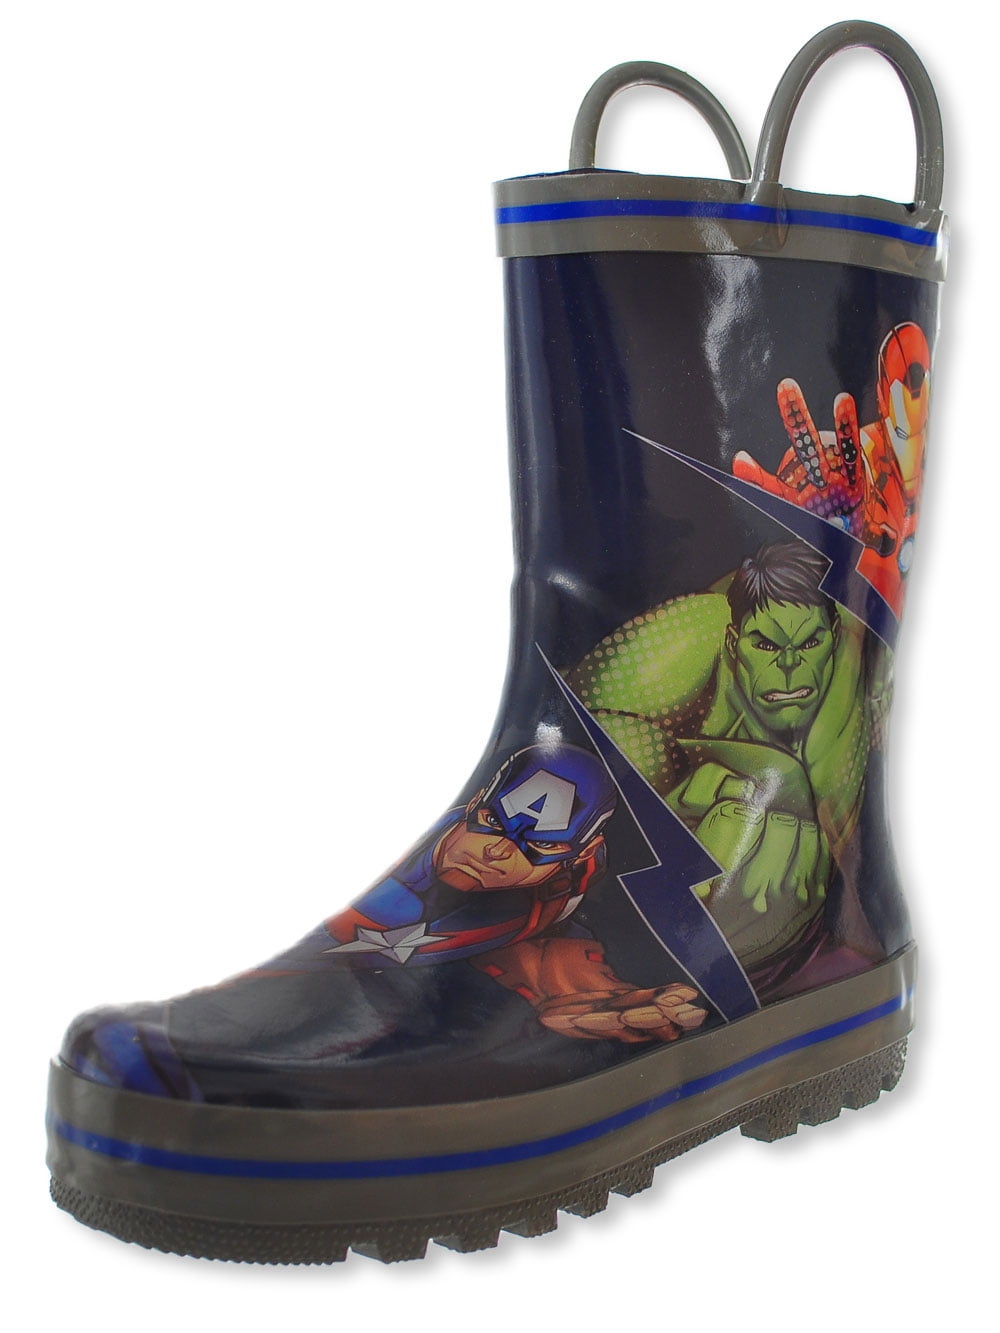 Avengers Marvel Kids Wellinghton Boots Rain and Snow 